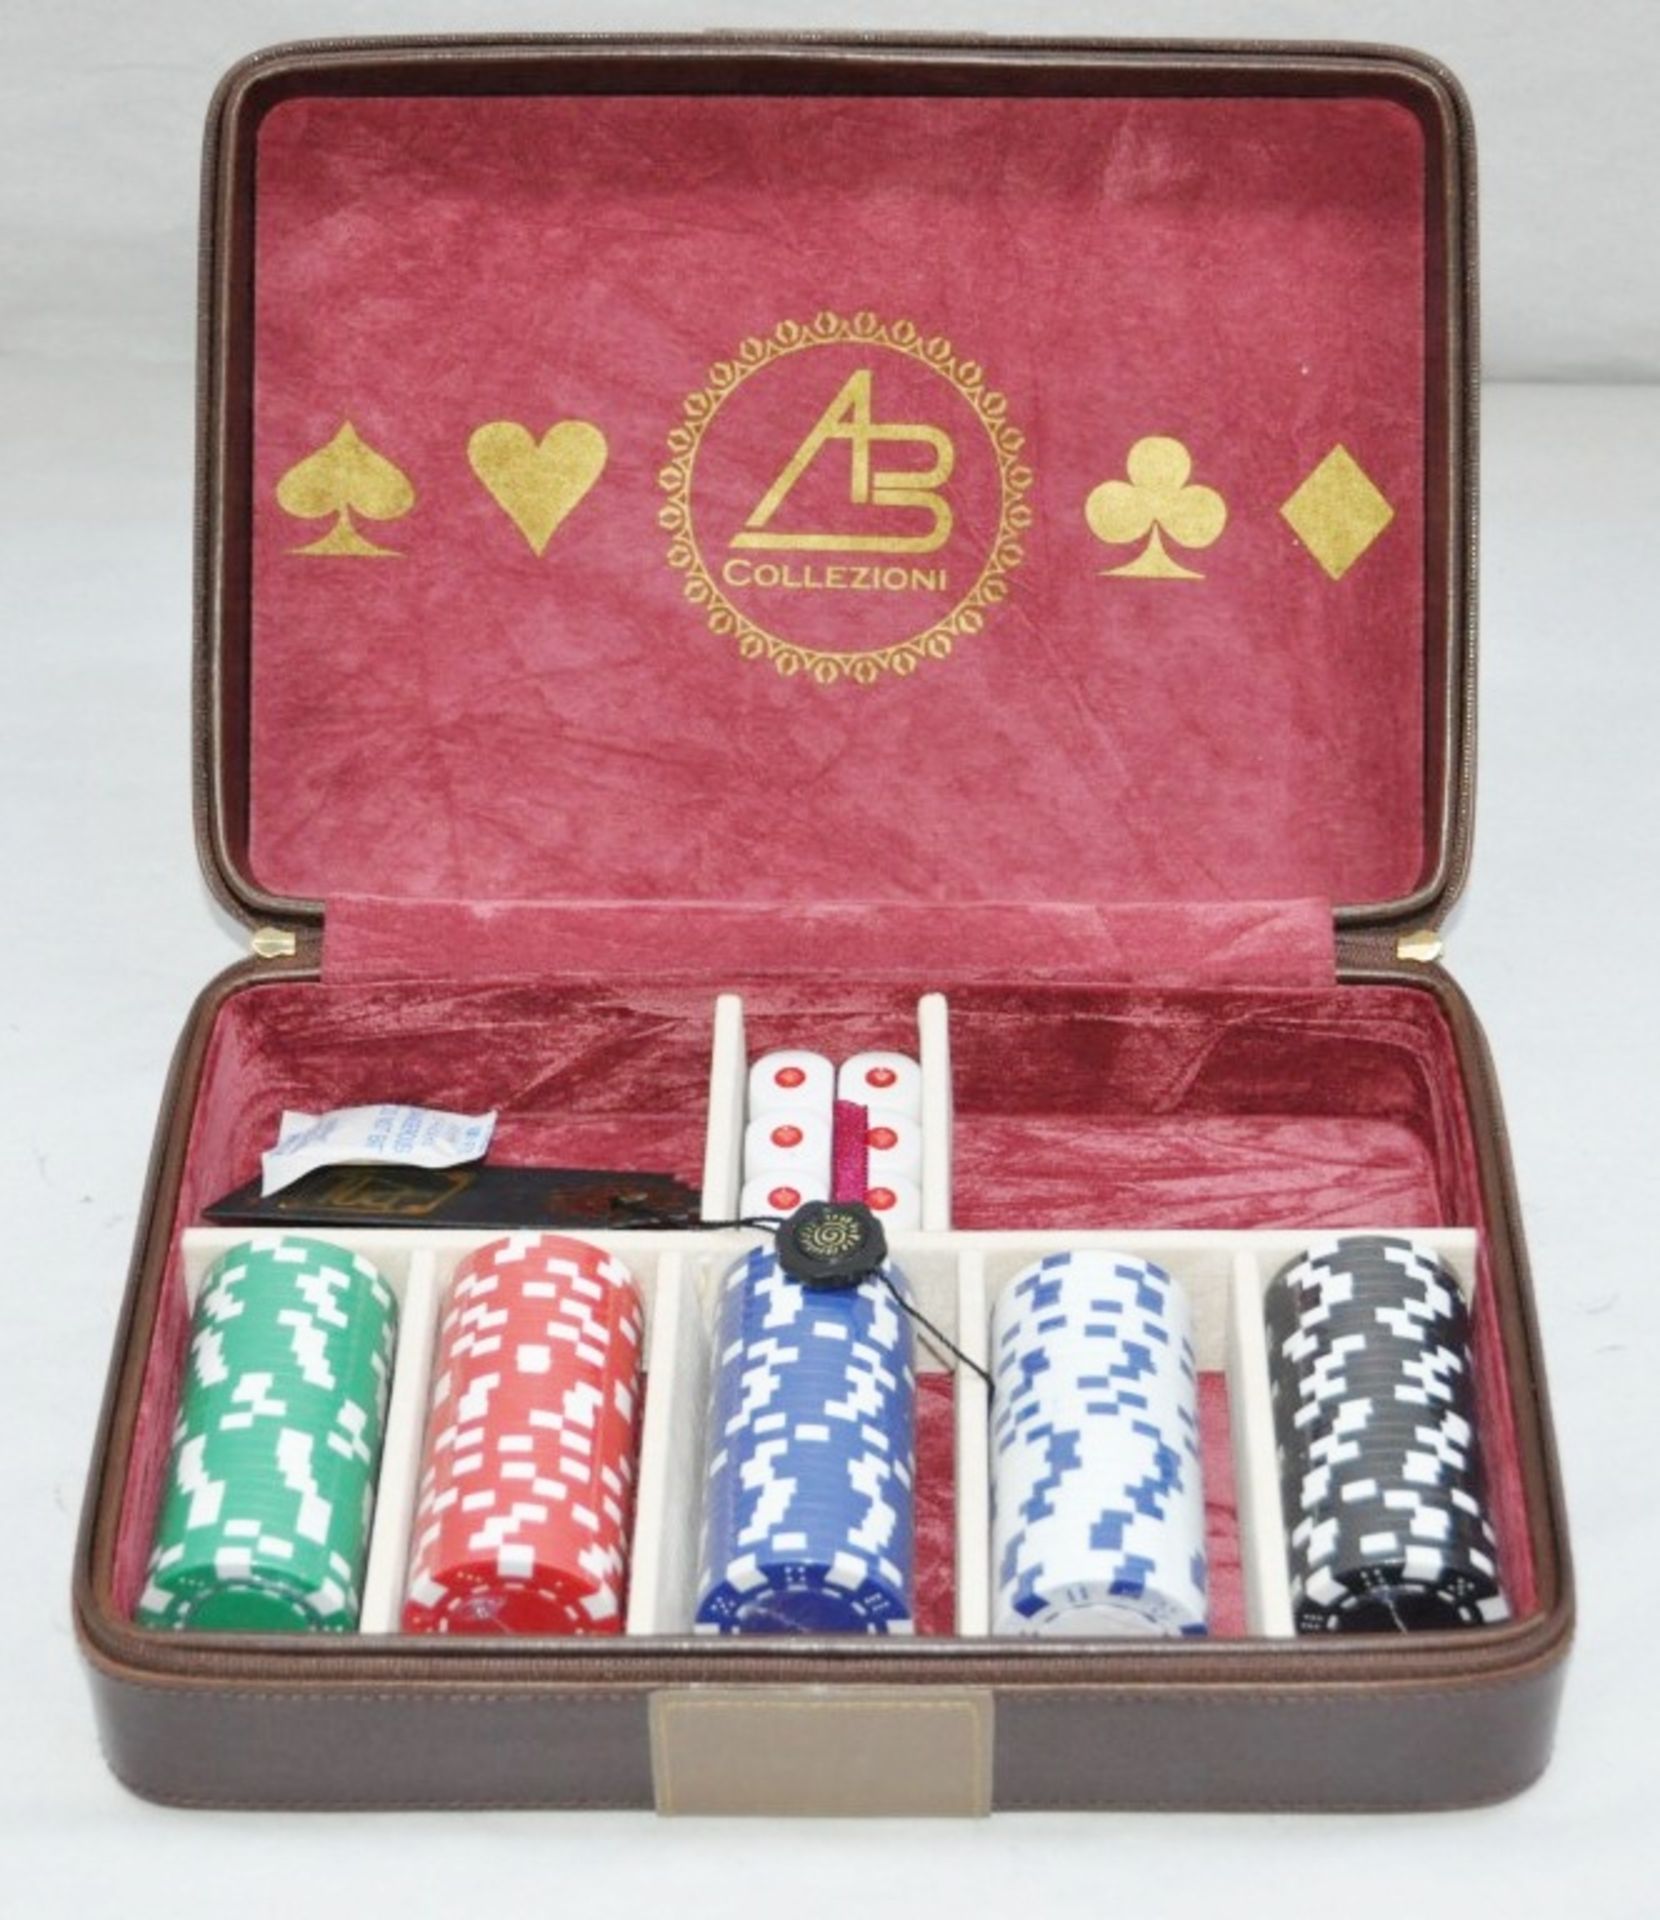 1 x "AB Collezioni" Italian Genuine Leather-Bound Luxury POKER SET (34047) - Ref LT006A - Features A